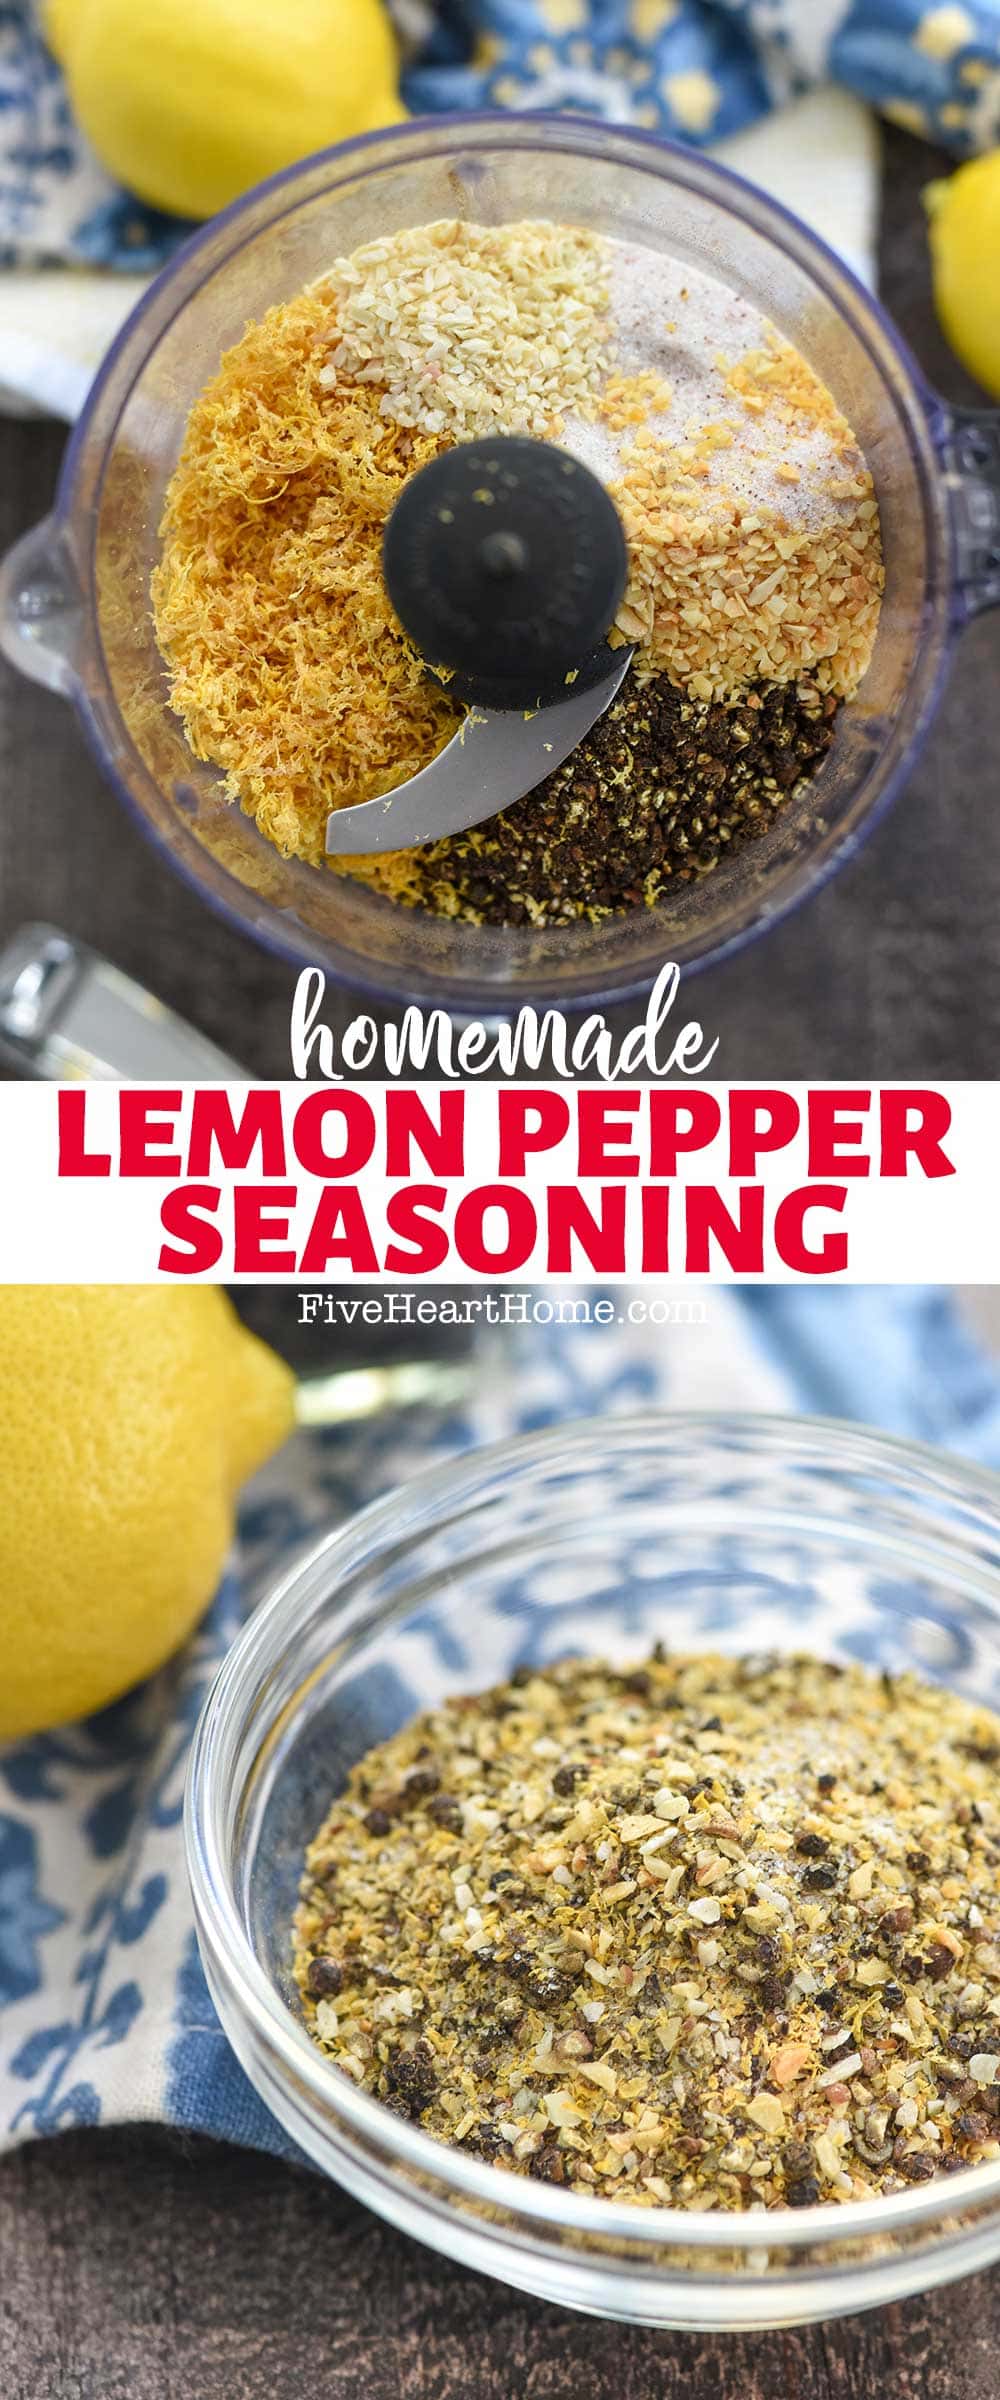 Lemon Pepper Seasoning Recipe ~ easy to make from scratch using just a few simple ingredients, for bright, bold flavor without the additives and artificial ingredients often found in store-bought seasonings! | FiveHeartHome.com via @fivehearthome